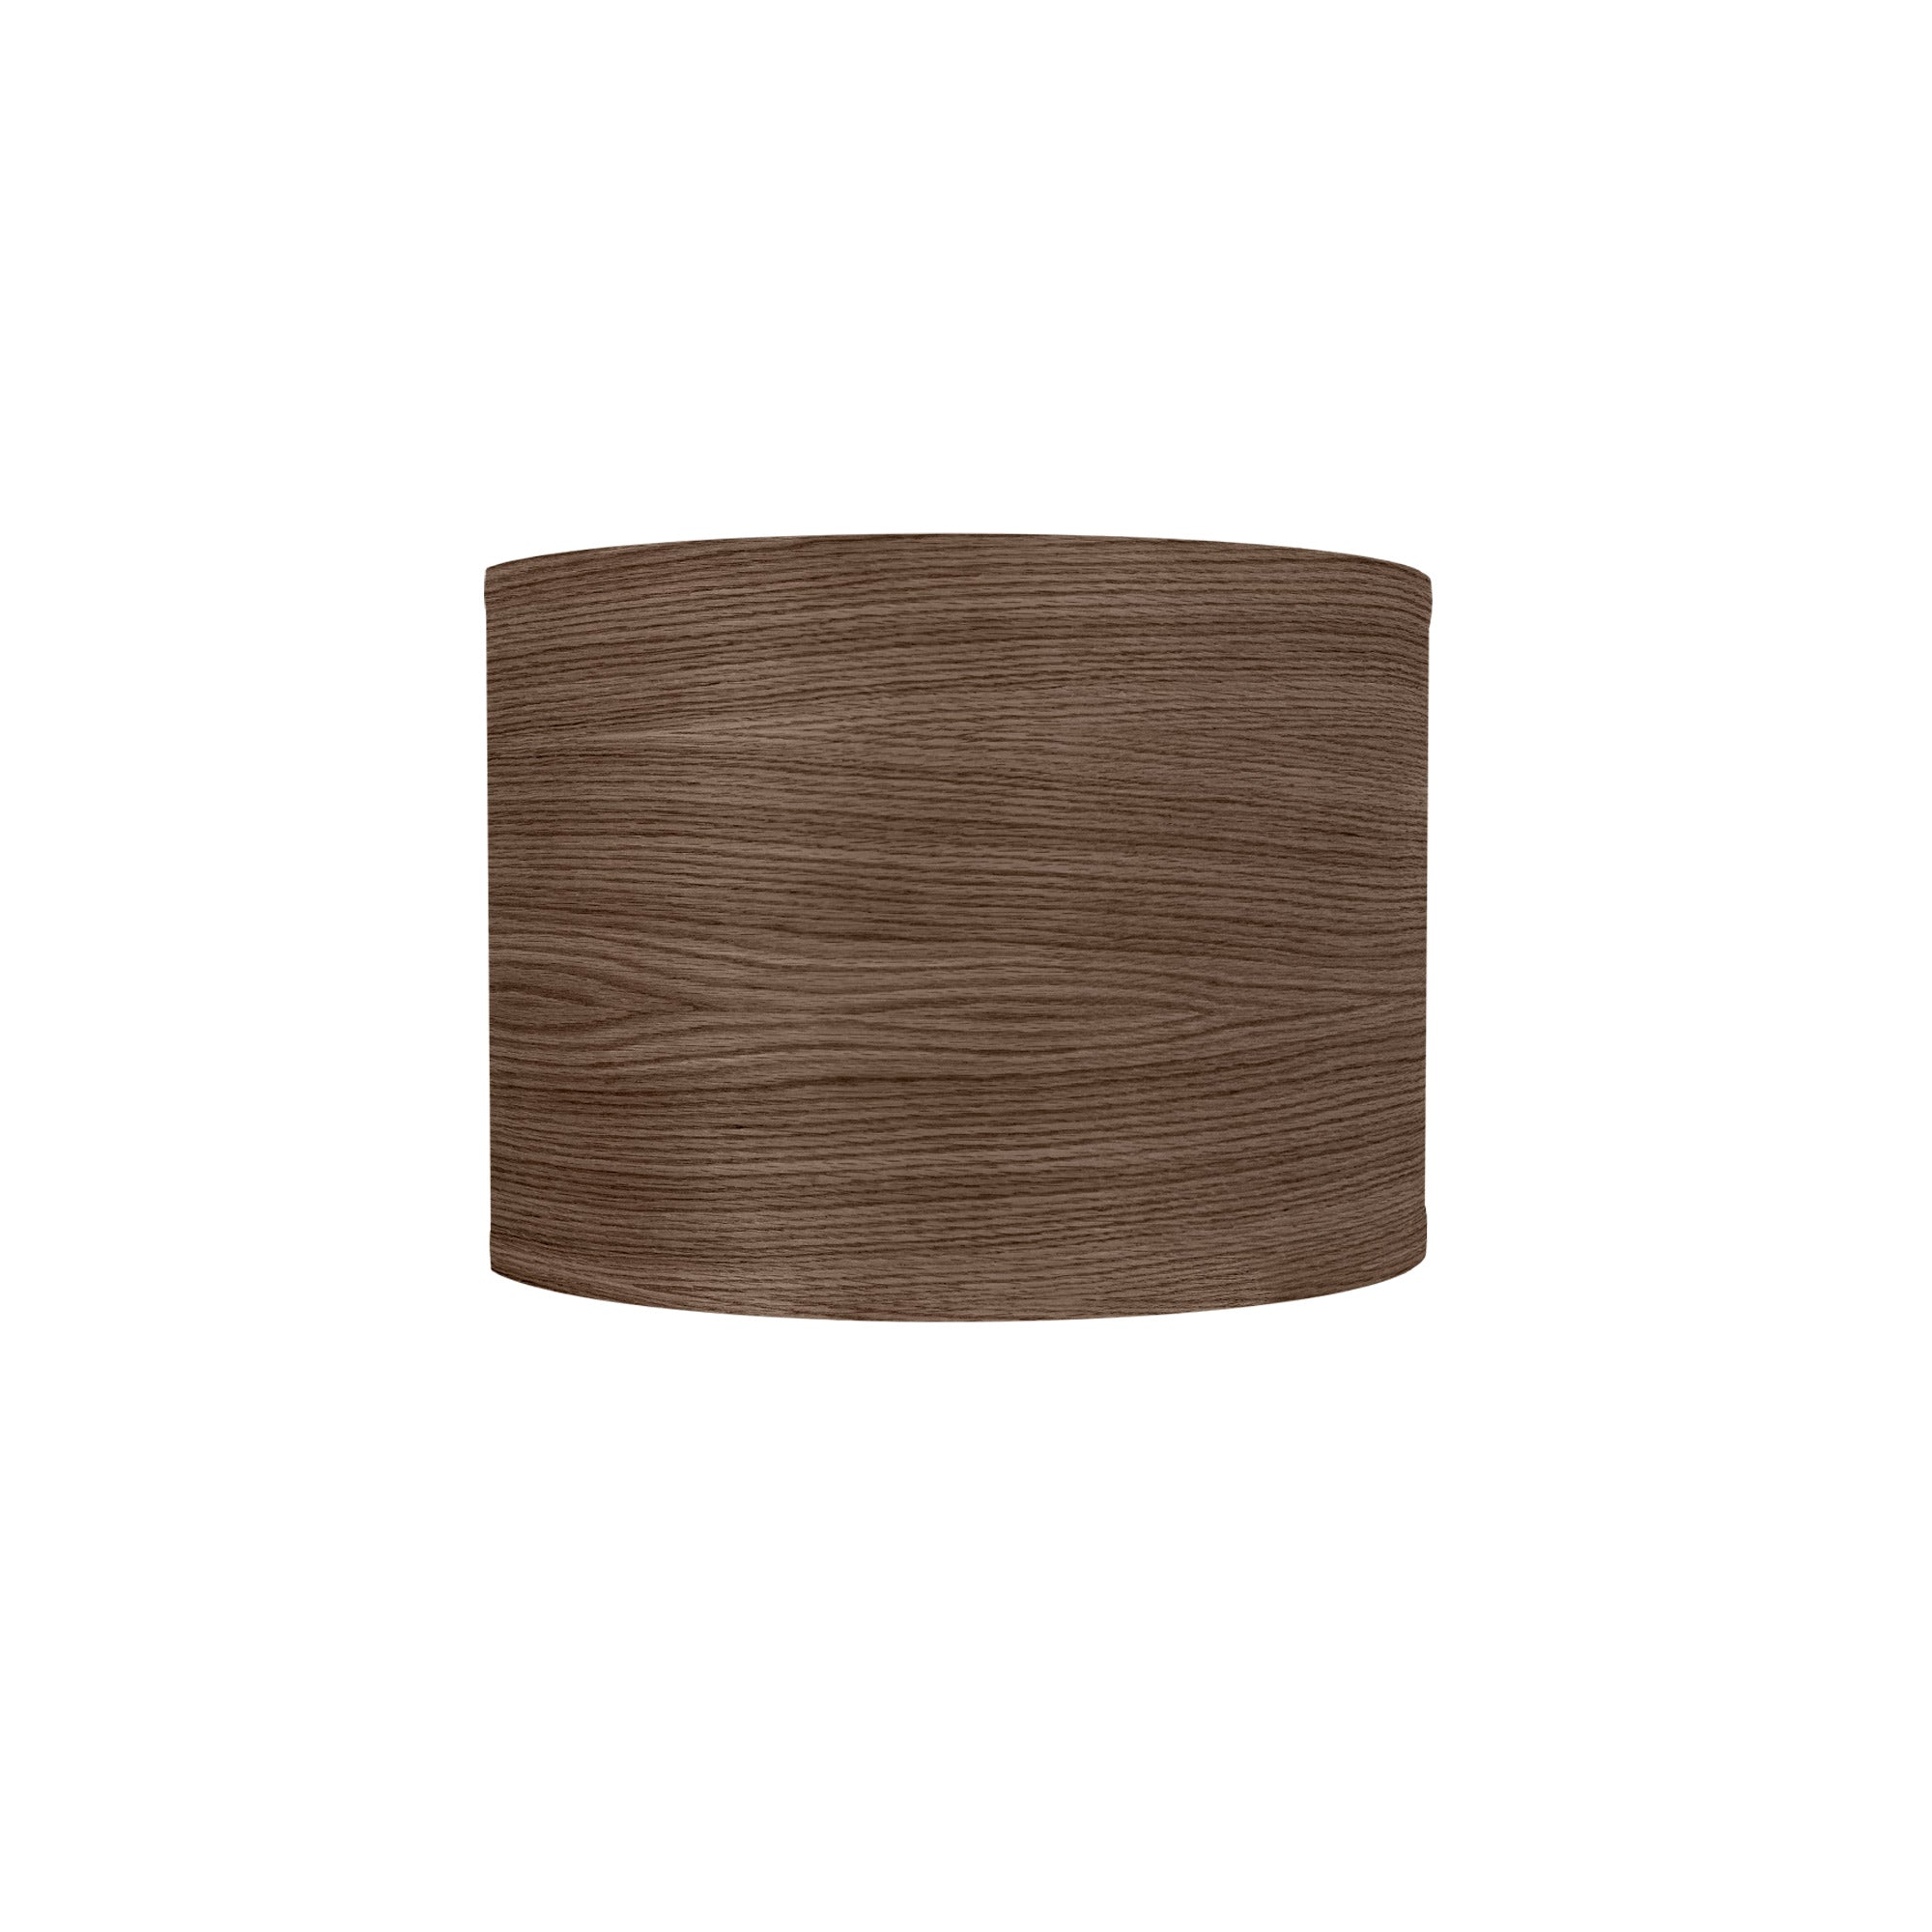 The Bryce Wall Sconce from Seascape Fixtures with a photo veneer shade in walnut color.